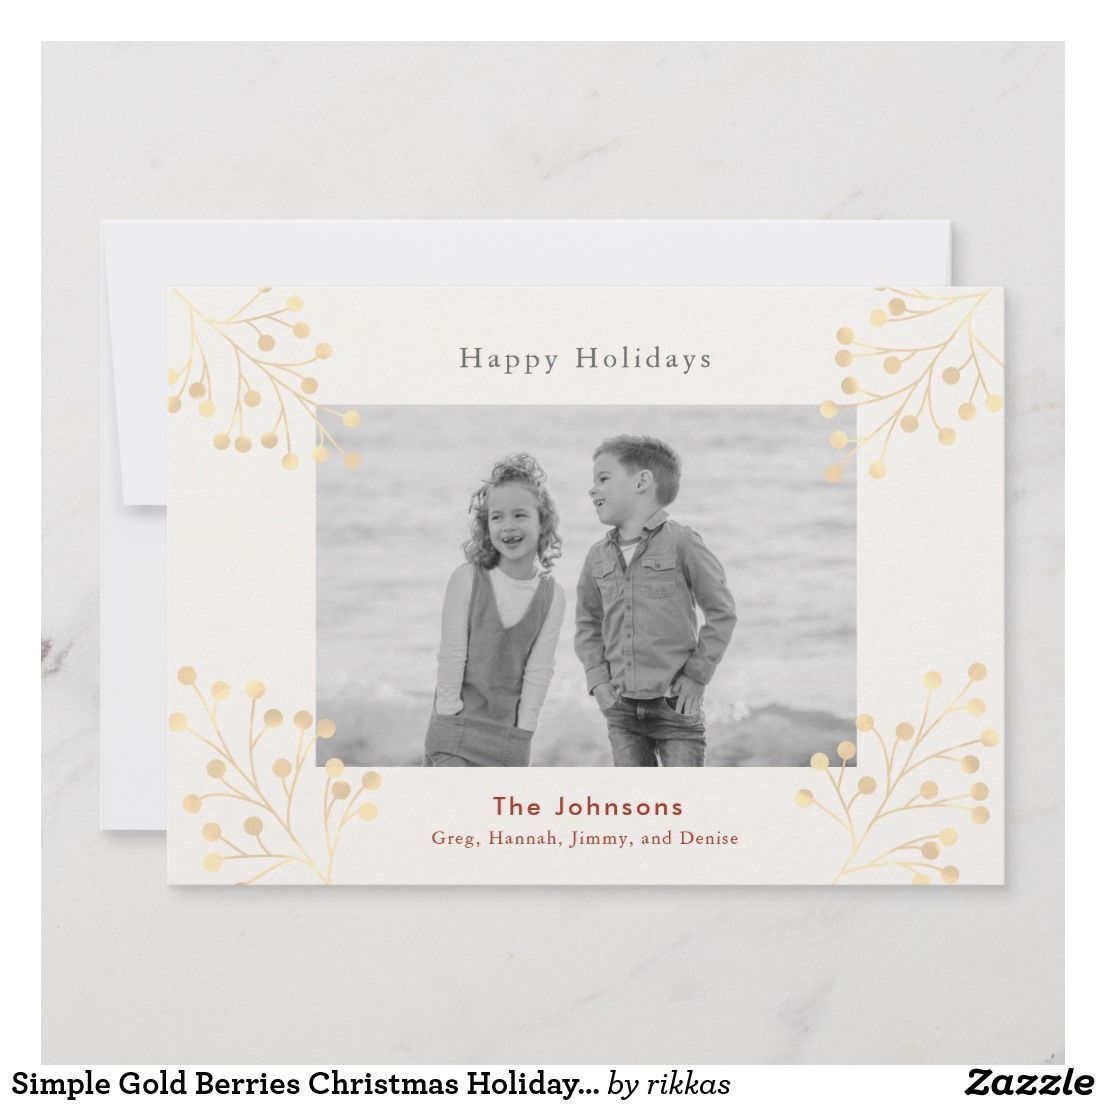 Simple Gold Berries Christmas Holiday Photo Card | Zazzle.com -   22 holiday Photos simple ideas